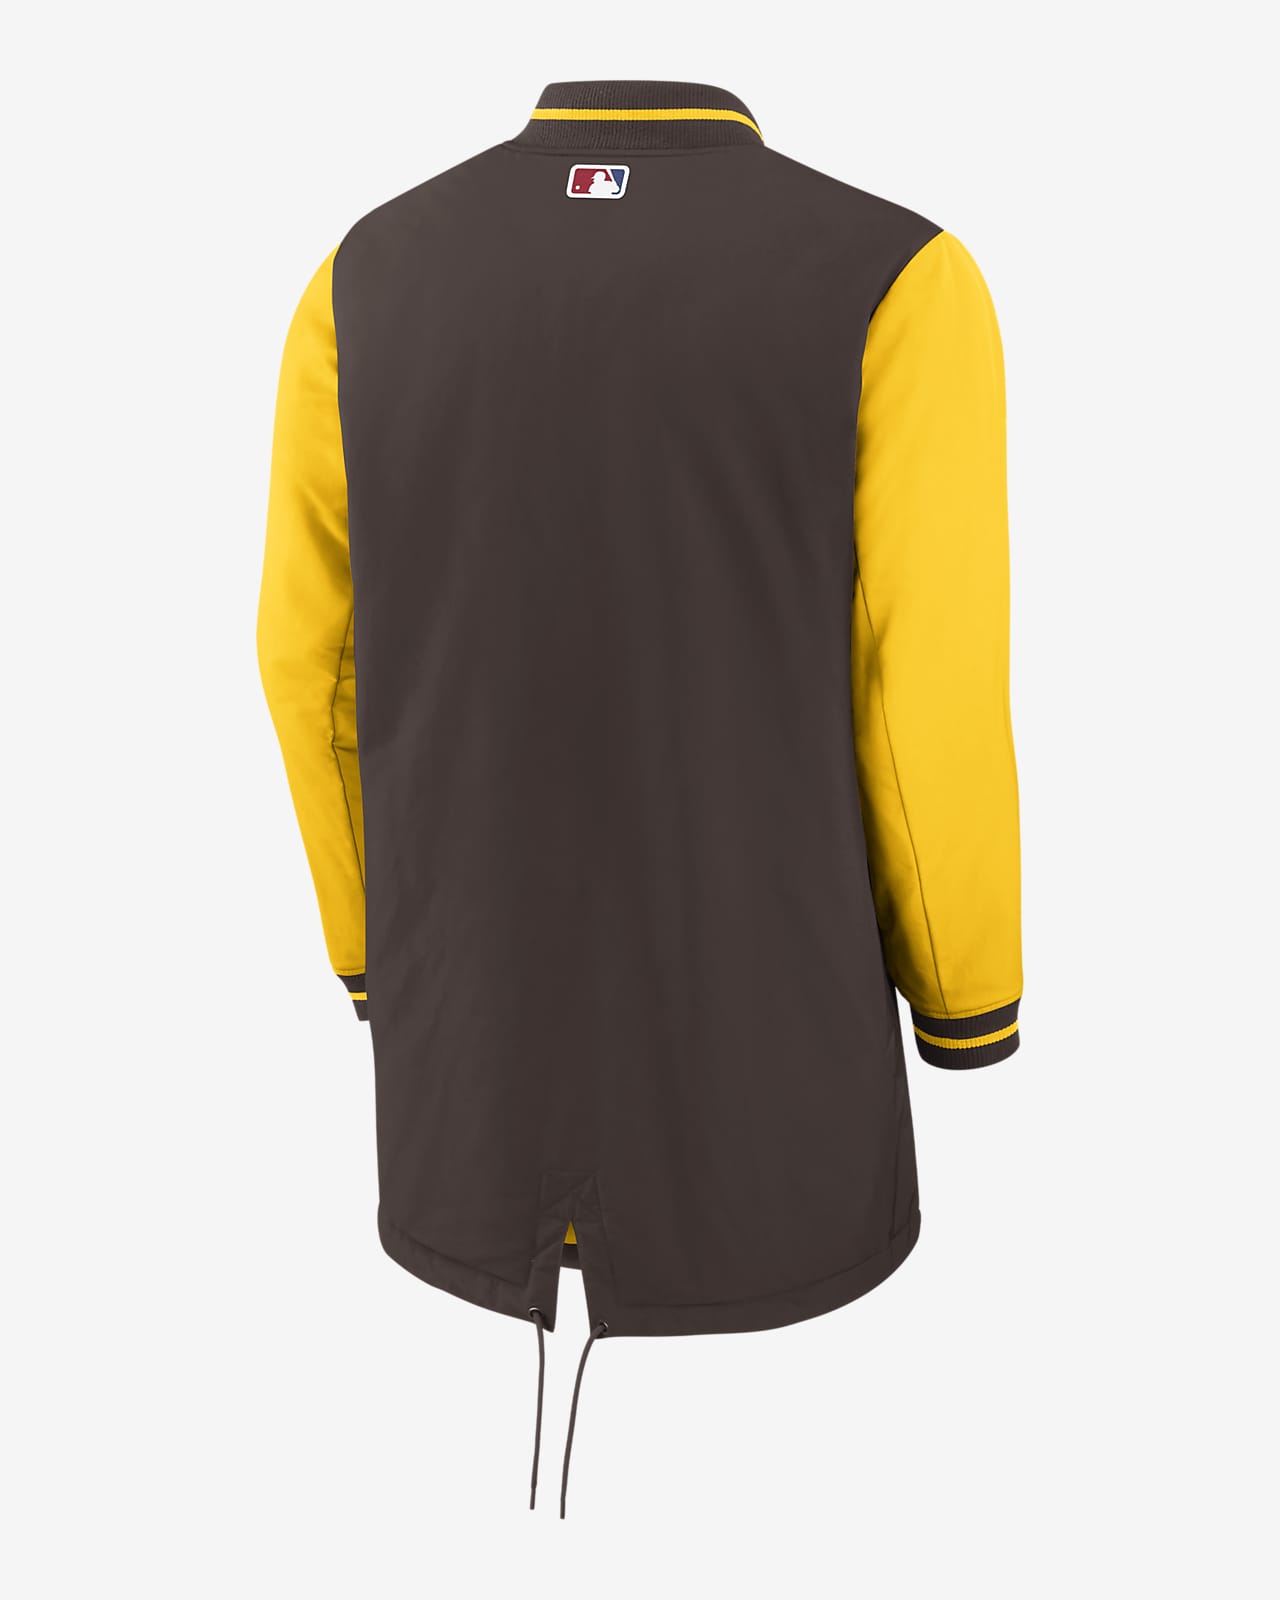 Nike City Connect Dugout (MLB San Diego Padres) Men's Full-Zip